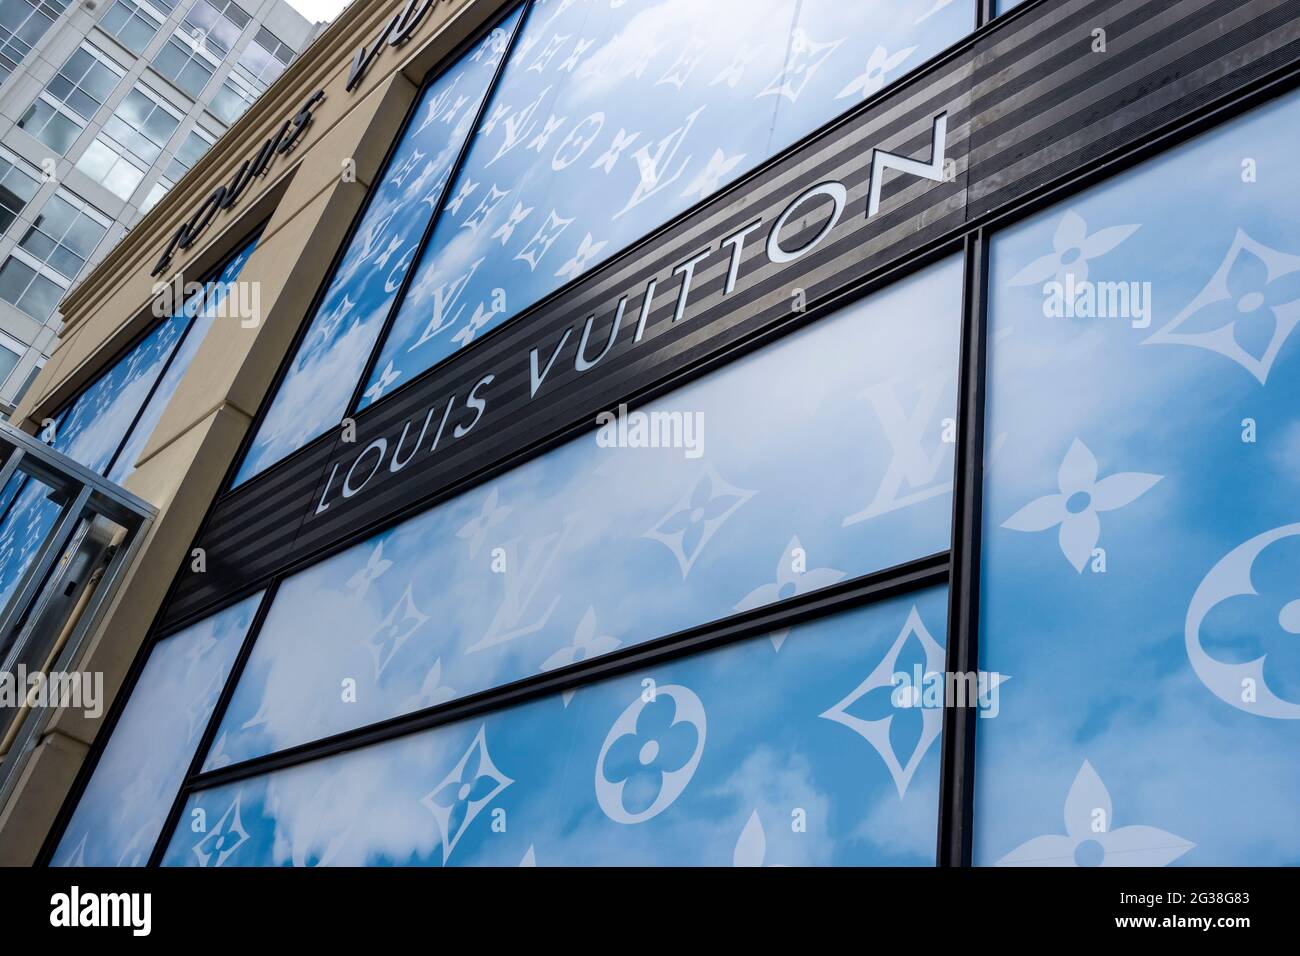 Bellevue, WA USA - circa May 2021: Exterior view of a Louis Vuitton luxury fashion store in the downtown area on a sunny day. Stock Photo